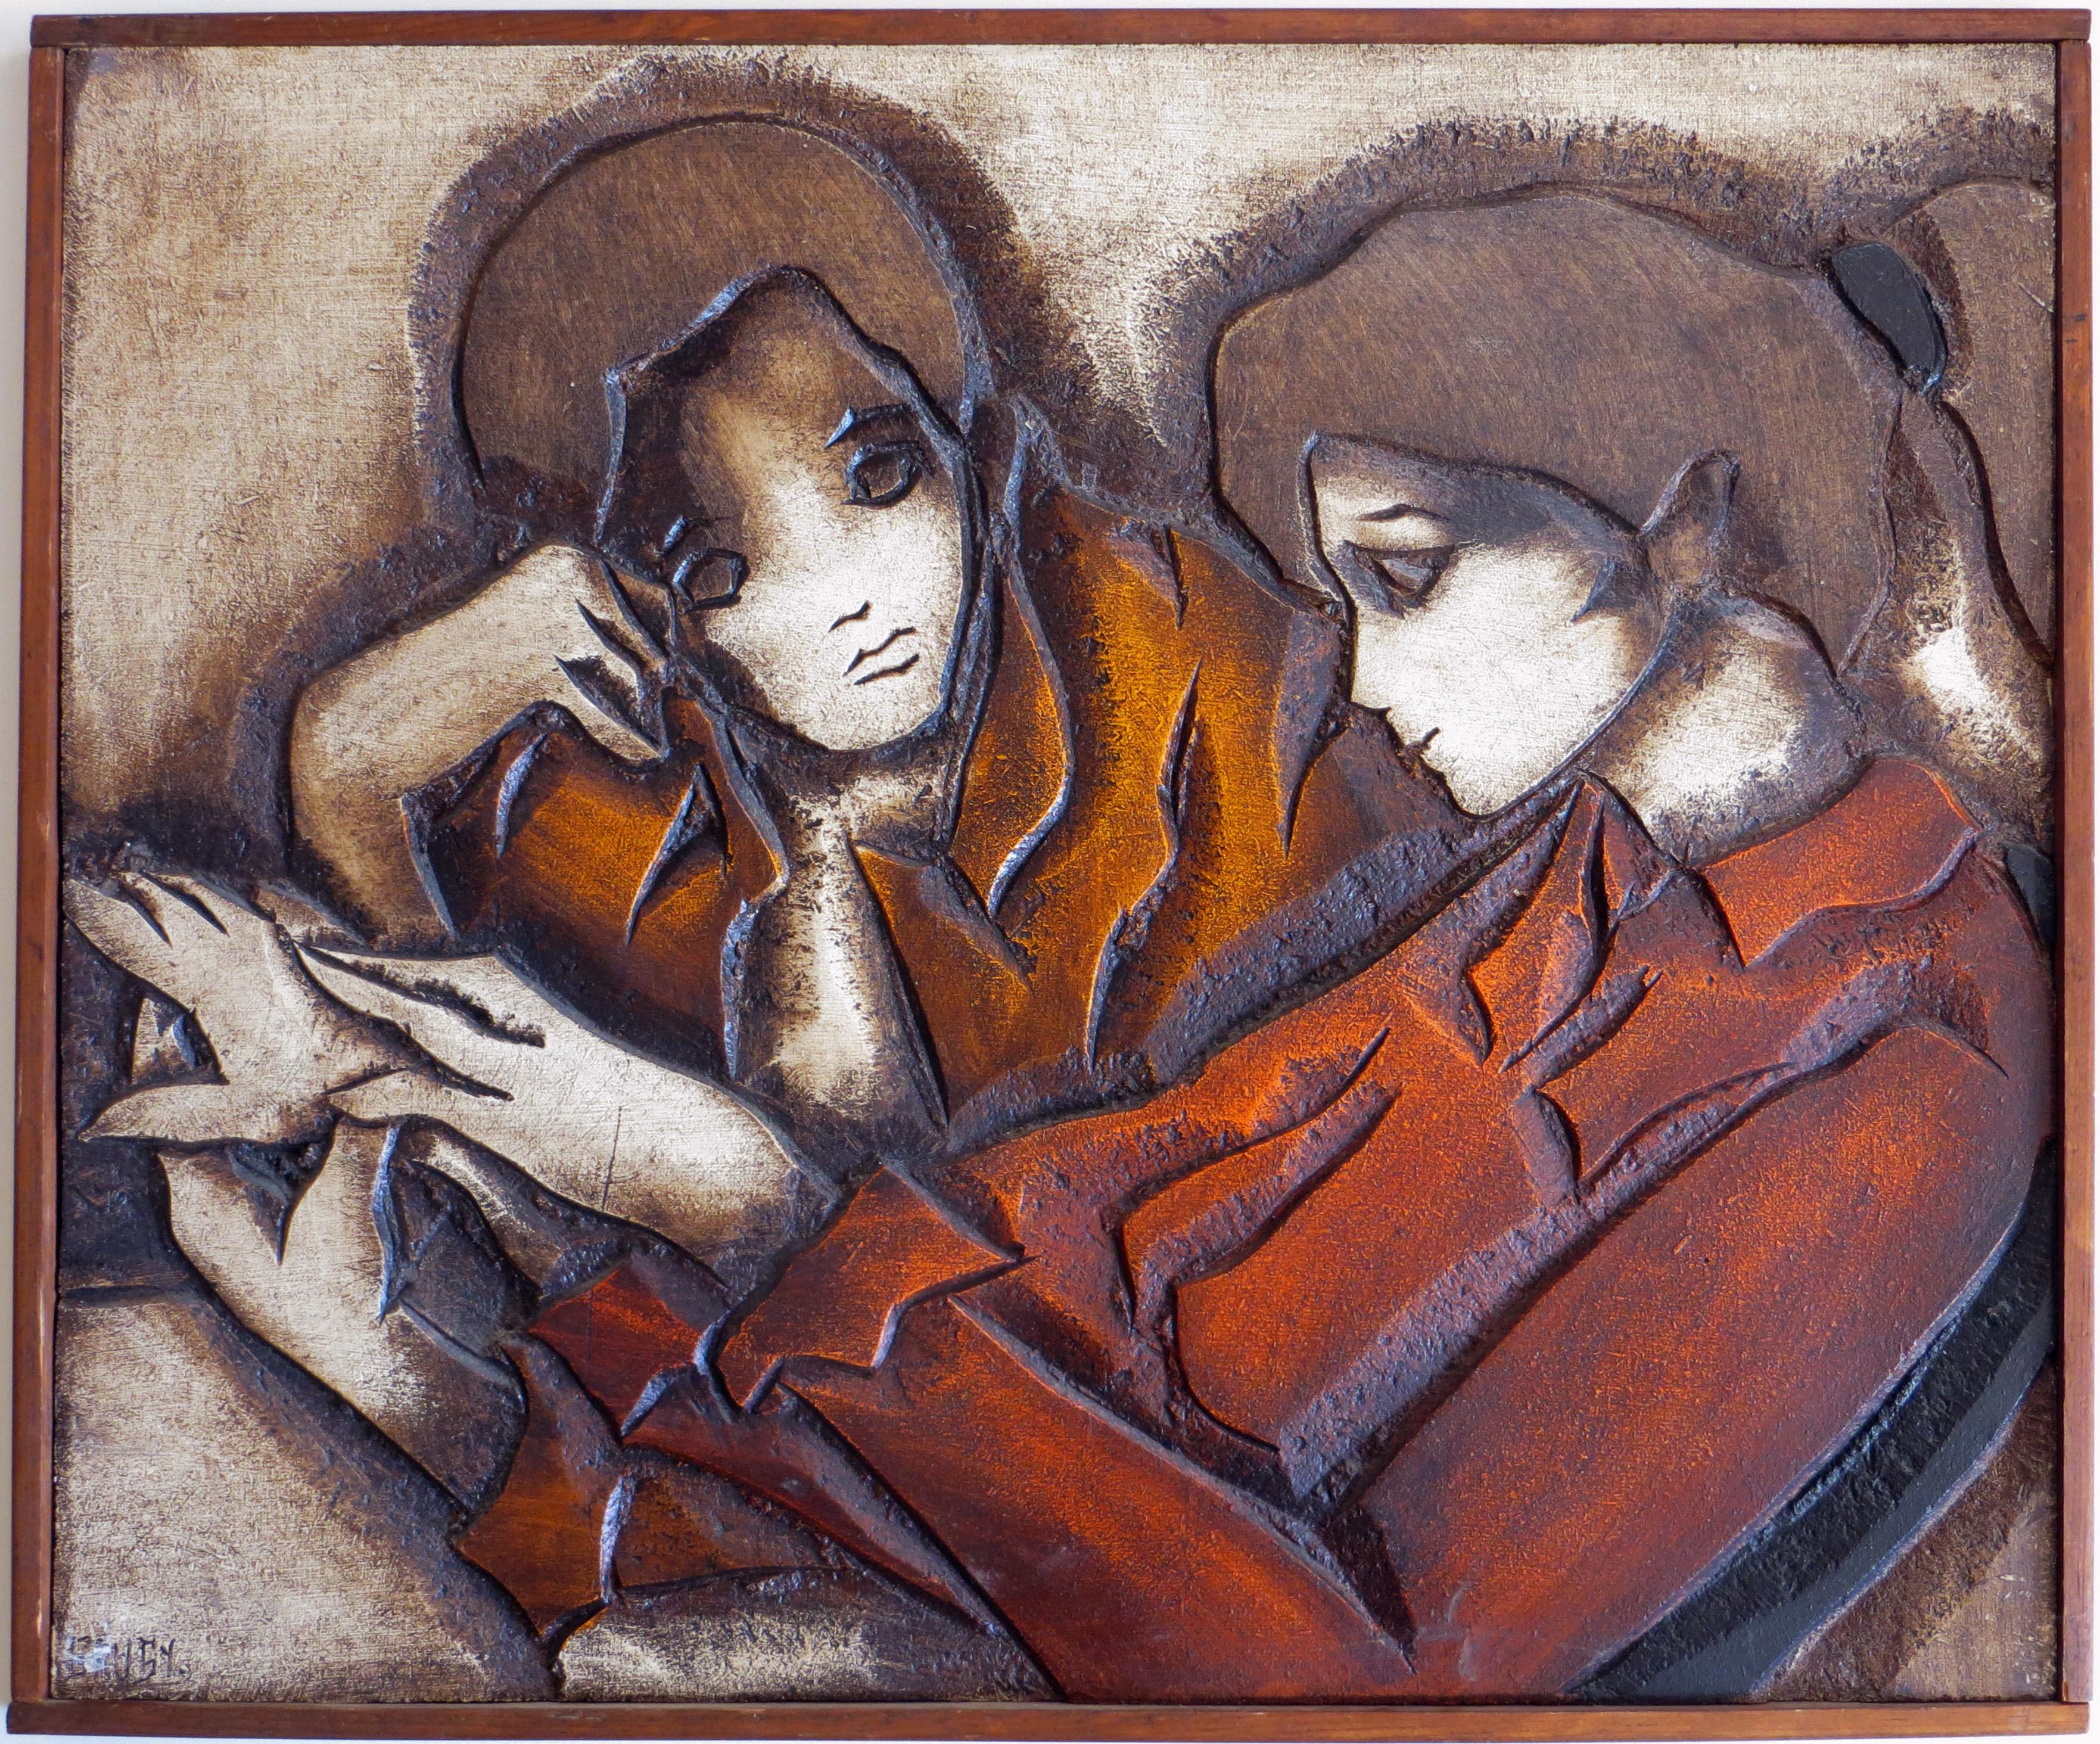 Jean-Claude Gaugy Figurative Painting - bas-relief Wall Sculpture - Two Persons in Conversation